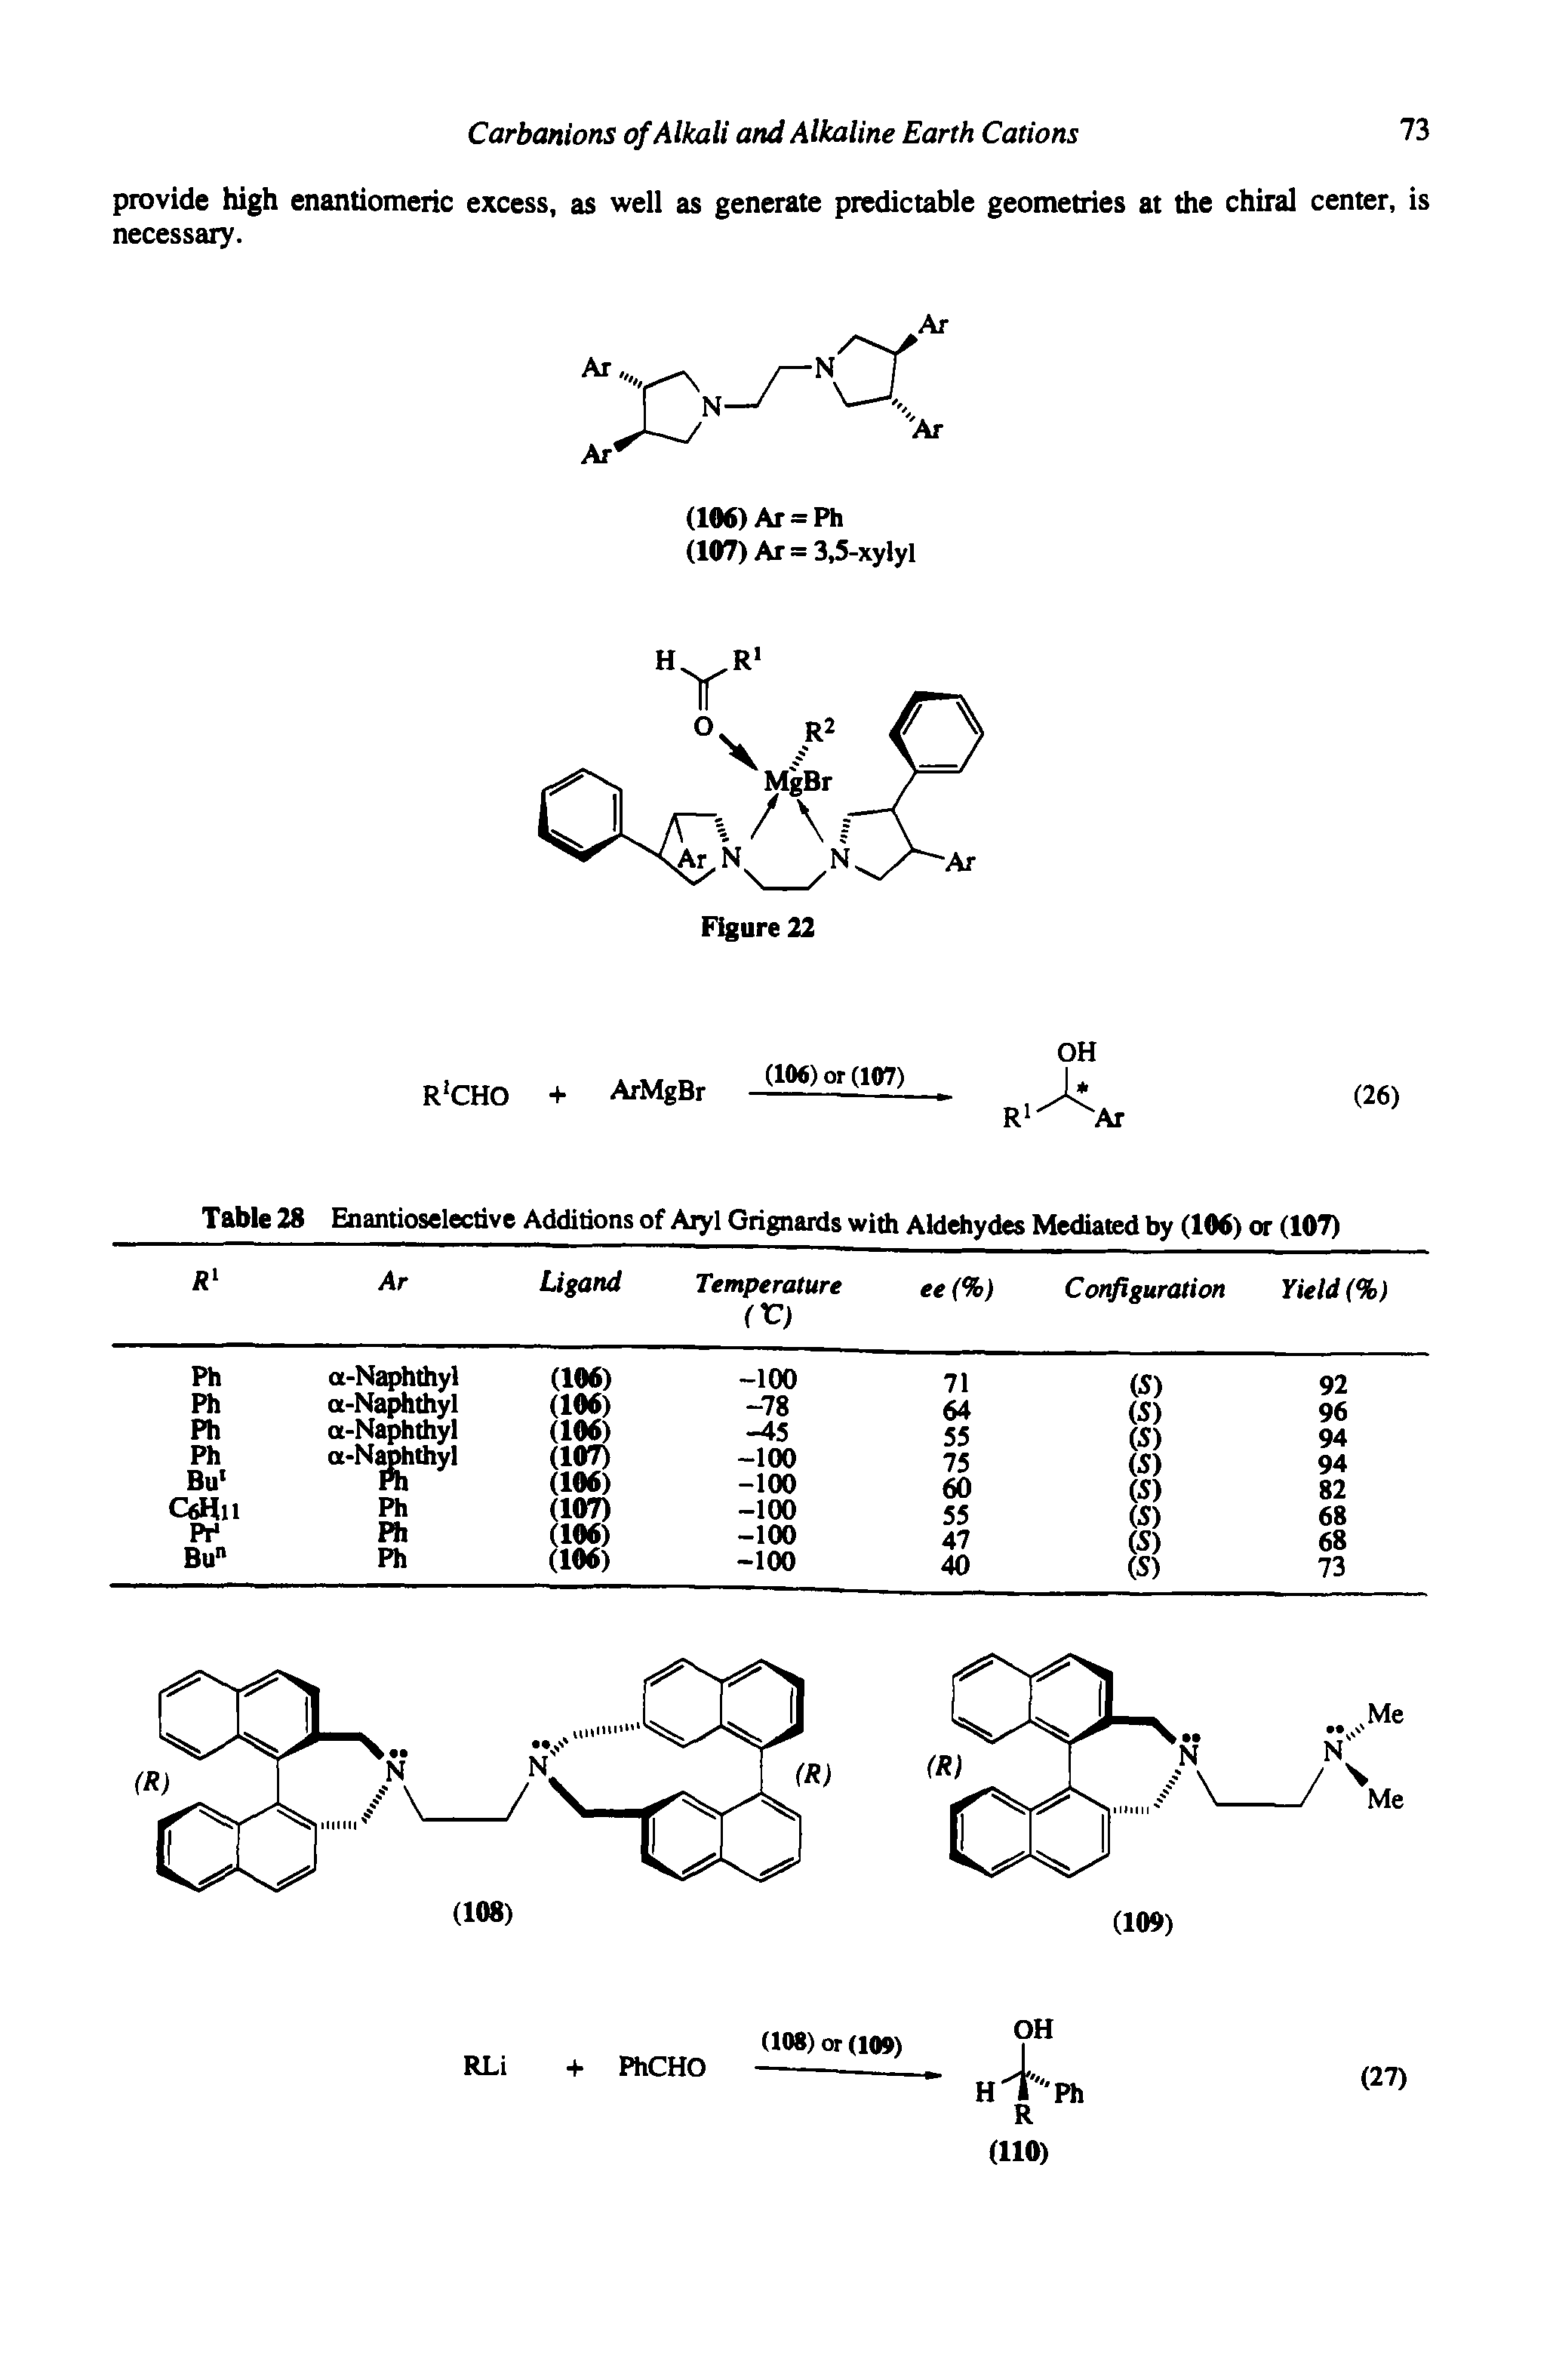 Table 28 Enantioselecdve Additions of Aryl Grignards with Aldehydes Mediated by (106) or (107) R Ar...